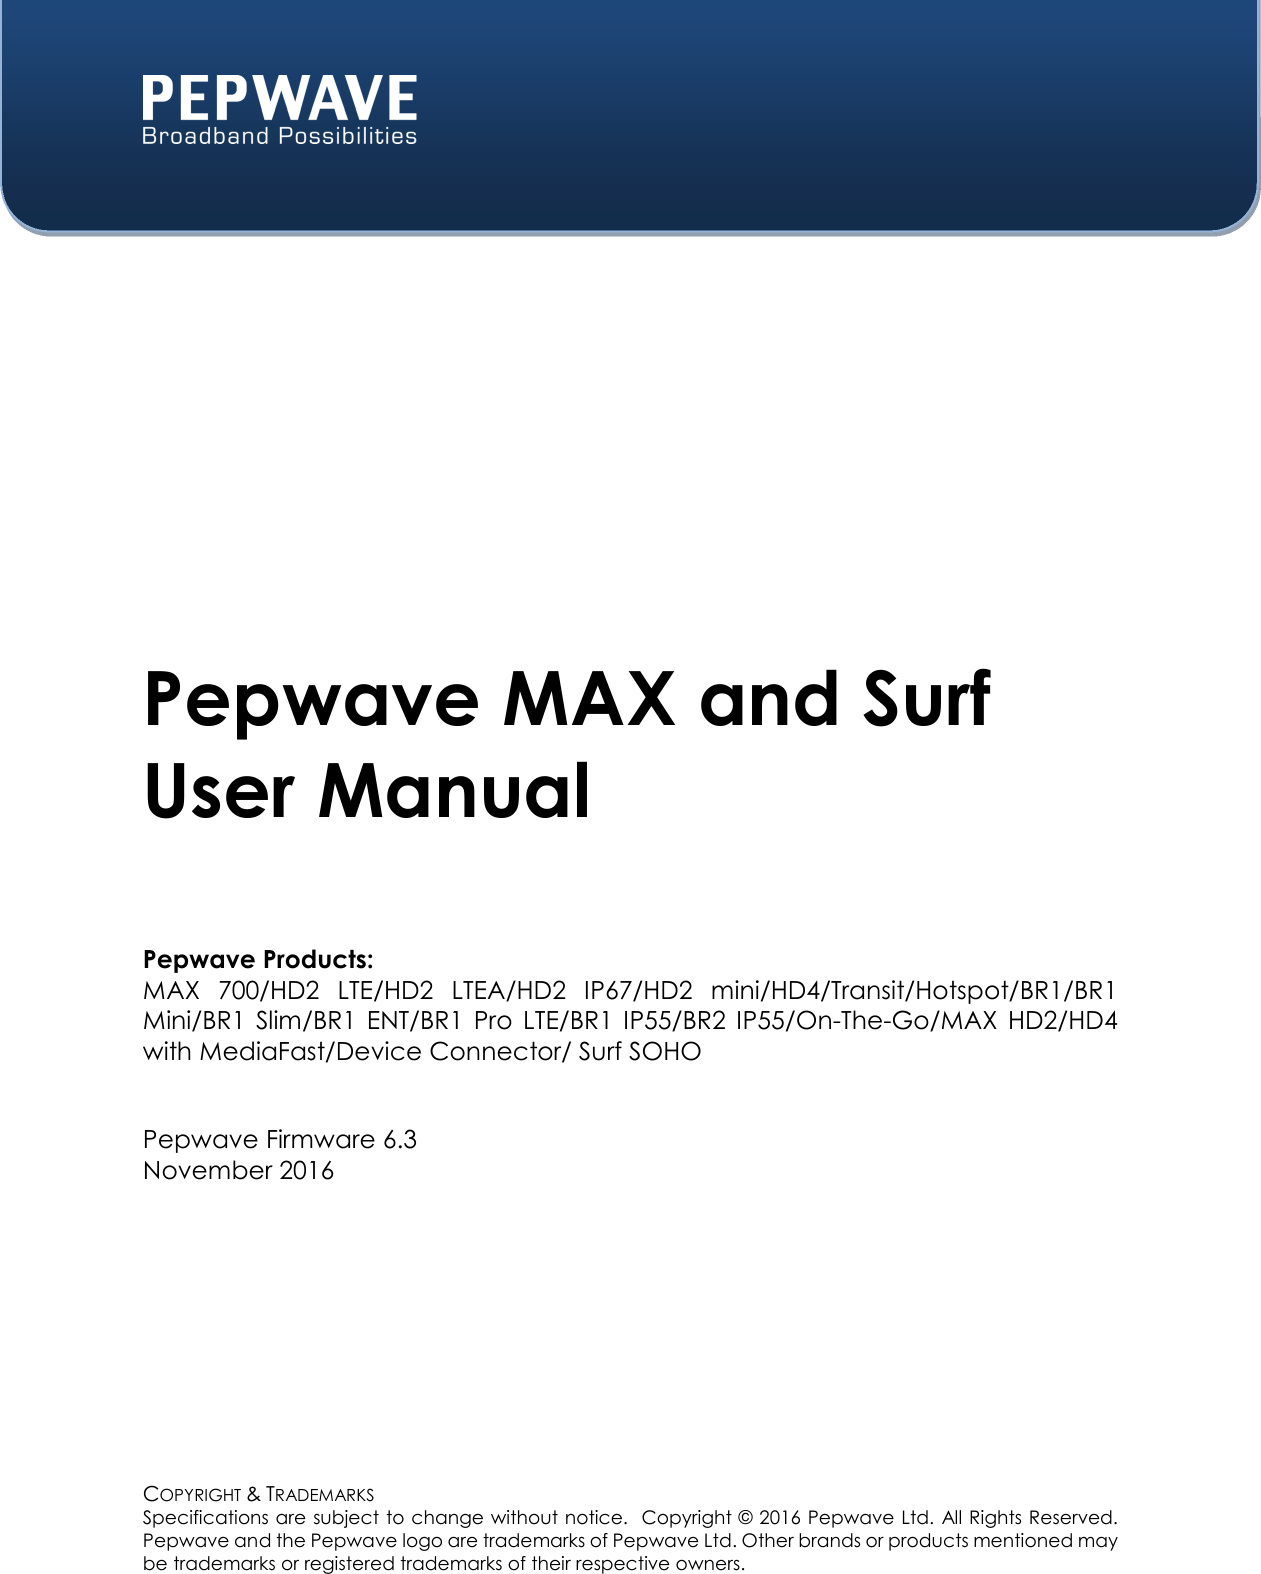  COPYRIGHT &amp; TRADEMARKS Specifications are subject to change without notice.  Copyright © 2016 Pepwave Ltd. All Rights Reserved.  Pepwave and the Pepwave logo are trademarks of Pepwave Ltd. Other brands or products mentioned may be trademarks or registered trademarks of their respective owners.    Pepwave MAX and Surf User Manual  Pepwave Products: MAX  700/HD2  LTE/HD2  LTEA/HD2  IP67/HD2  mini/HD4/Transit/Hotspot/BR1/BR1 Mini/BR1  Slim/BR1  ENT/BR1  Pro  LTE/BR1  IP55/BR2  IP55/On-The-Go/MAX  HD2/HD4 with MediaFast/Device Connector/ Surf SOHO   Pepwave Firmware 6.3 November 2016